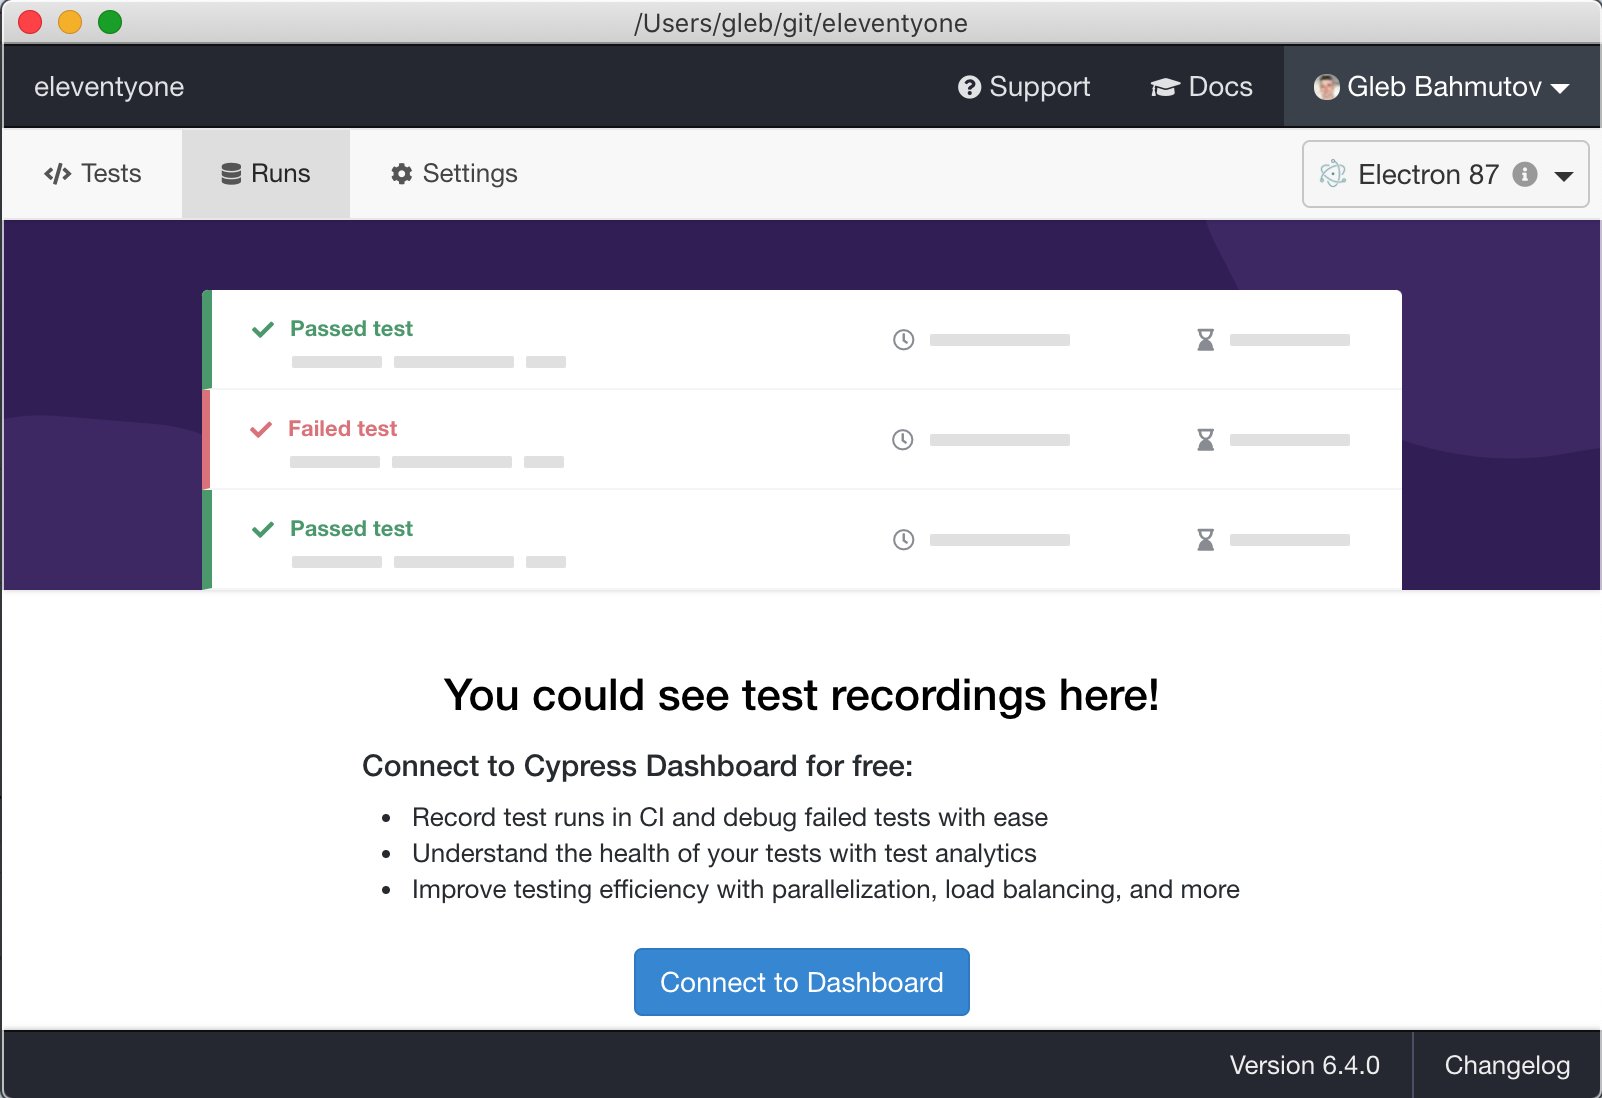 Click "Connect to Dashboard" button to set up project recording